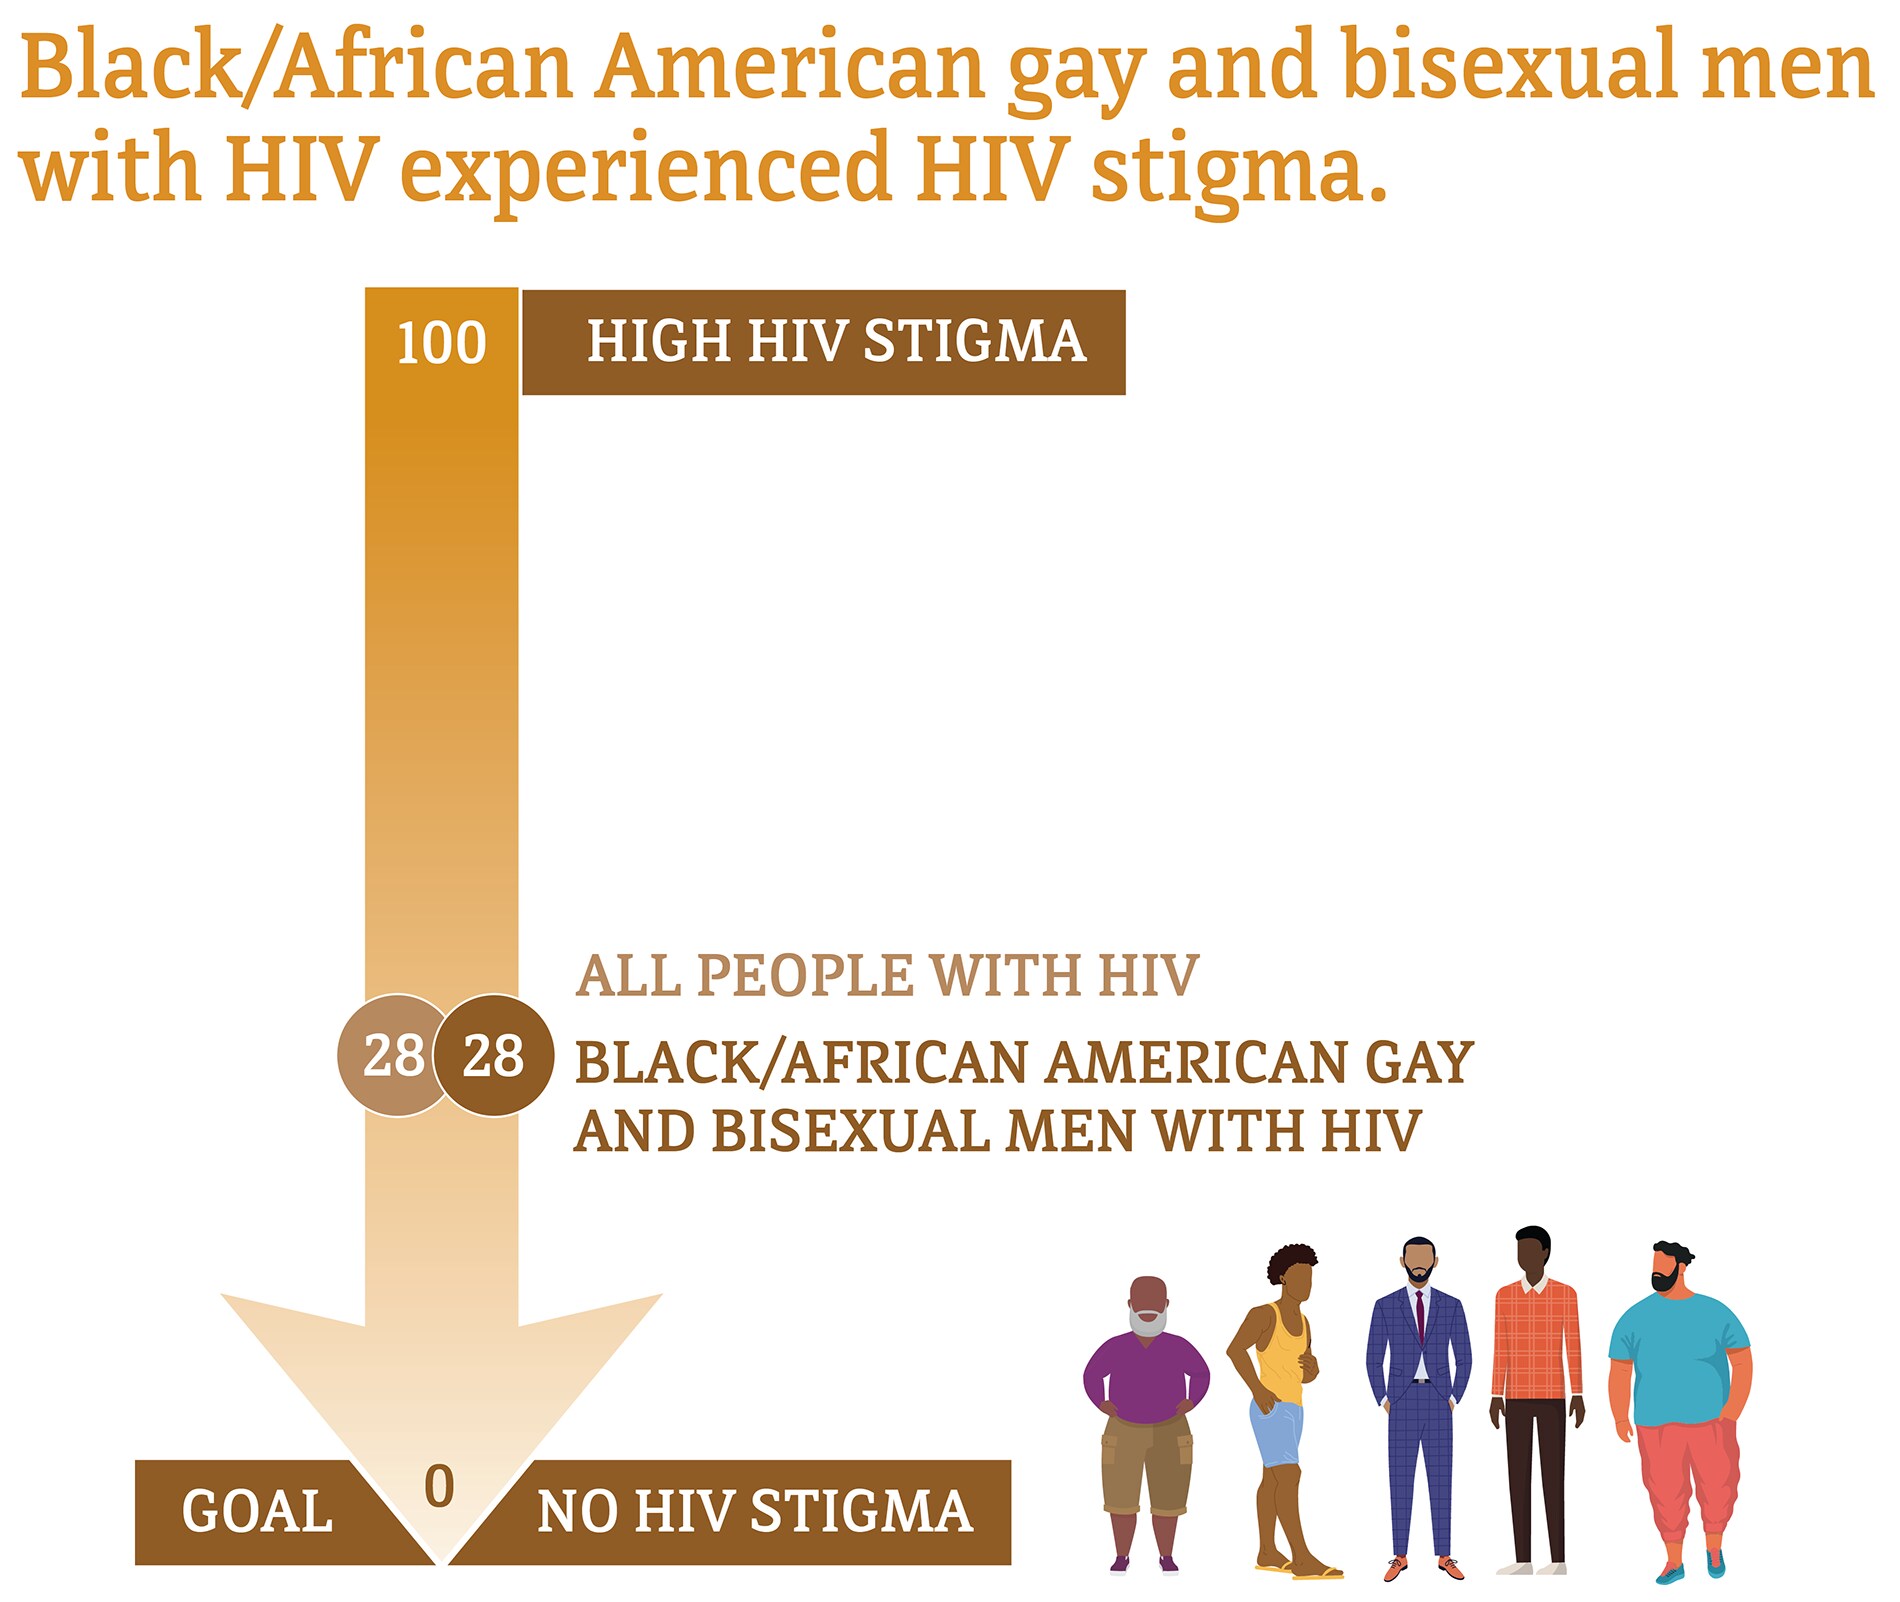 African American gay and bisexual men experienced HIV stigma.